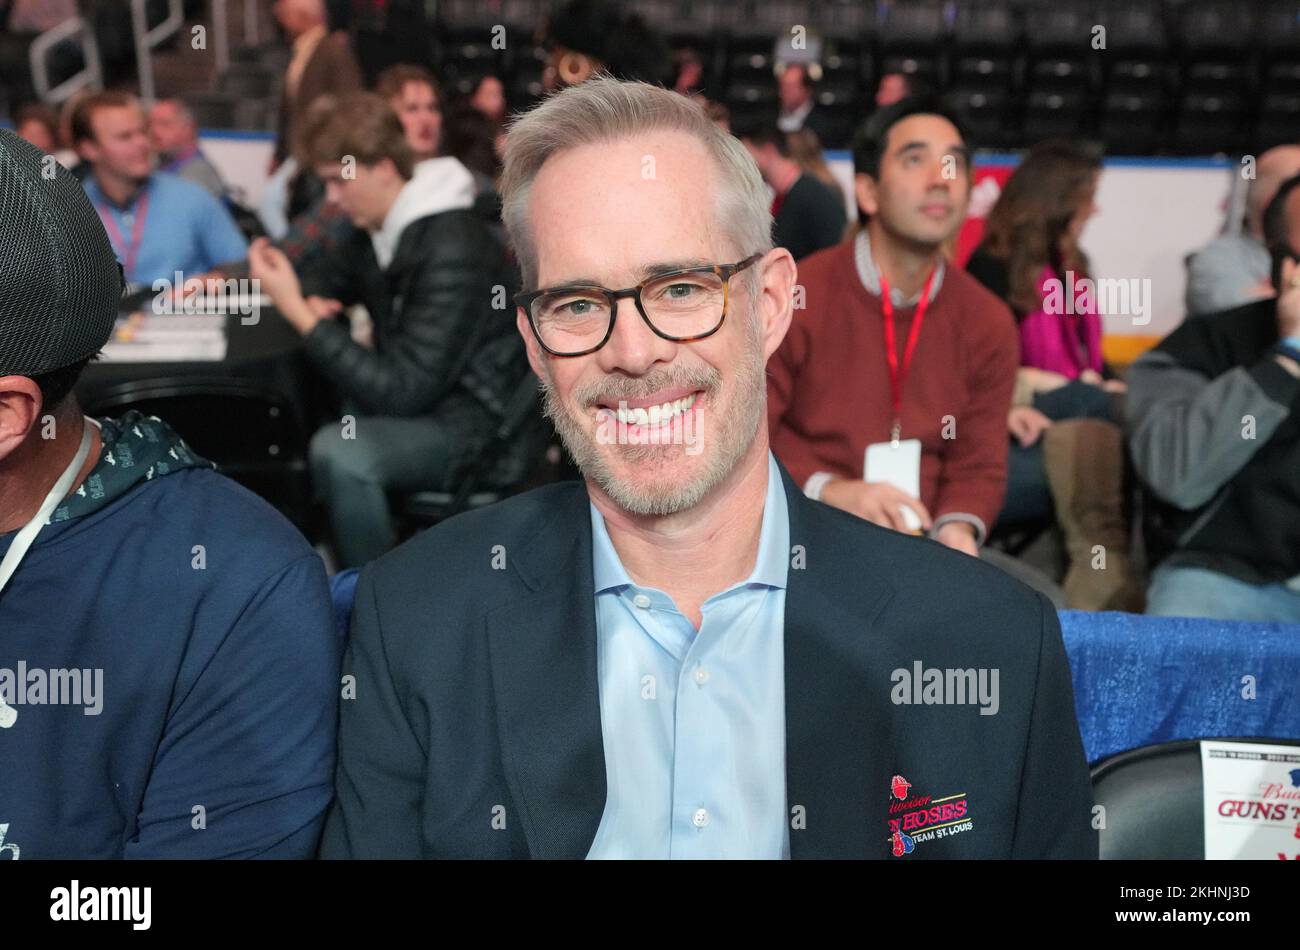 St. Louis, United States. 23rd Nov, 2022. ESPN broadcaster Joe Buck takes in the Annual Guns N' Hoses Boxing Showdown at the Enterprise Center in St. Louis on Wednesday, November 23, 2022. Guns N' Hoses, in its 35th year, pits firefighters vs policemen in boxing matches, to benefit The Backstoppers, an organization that provides financial support to families that have lost first responder family members in the line of duty. Photo by Bill Greenblatt/UPI Credit: UPI/Alamy Live News Stock Photo